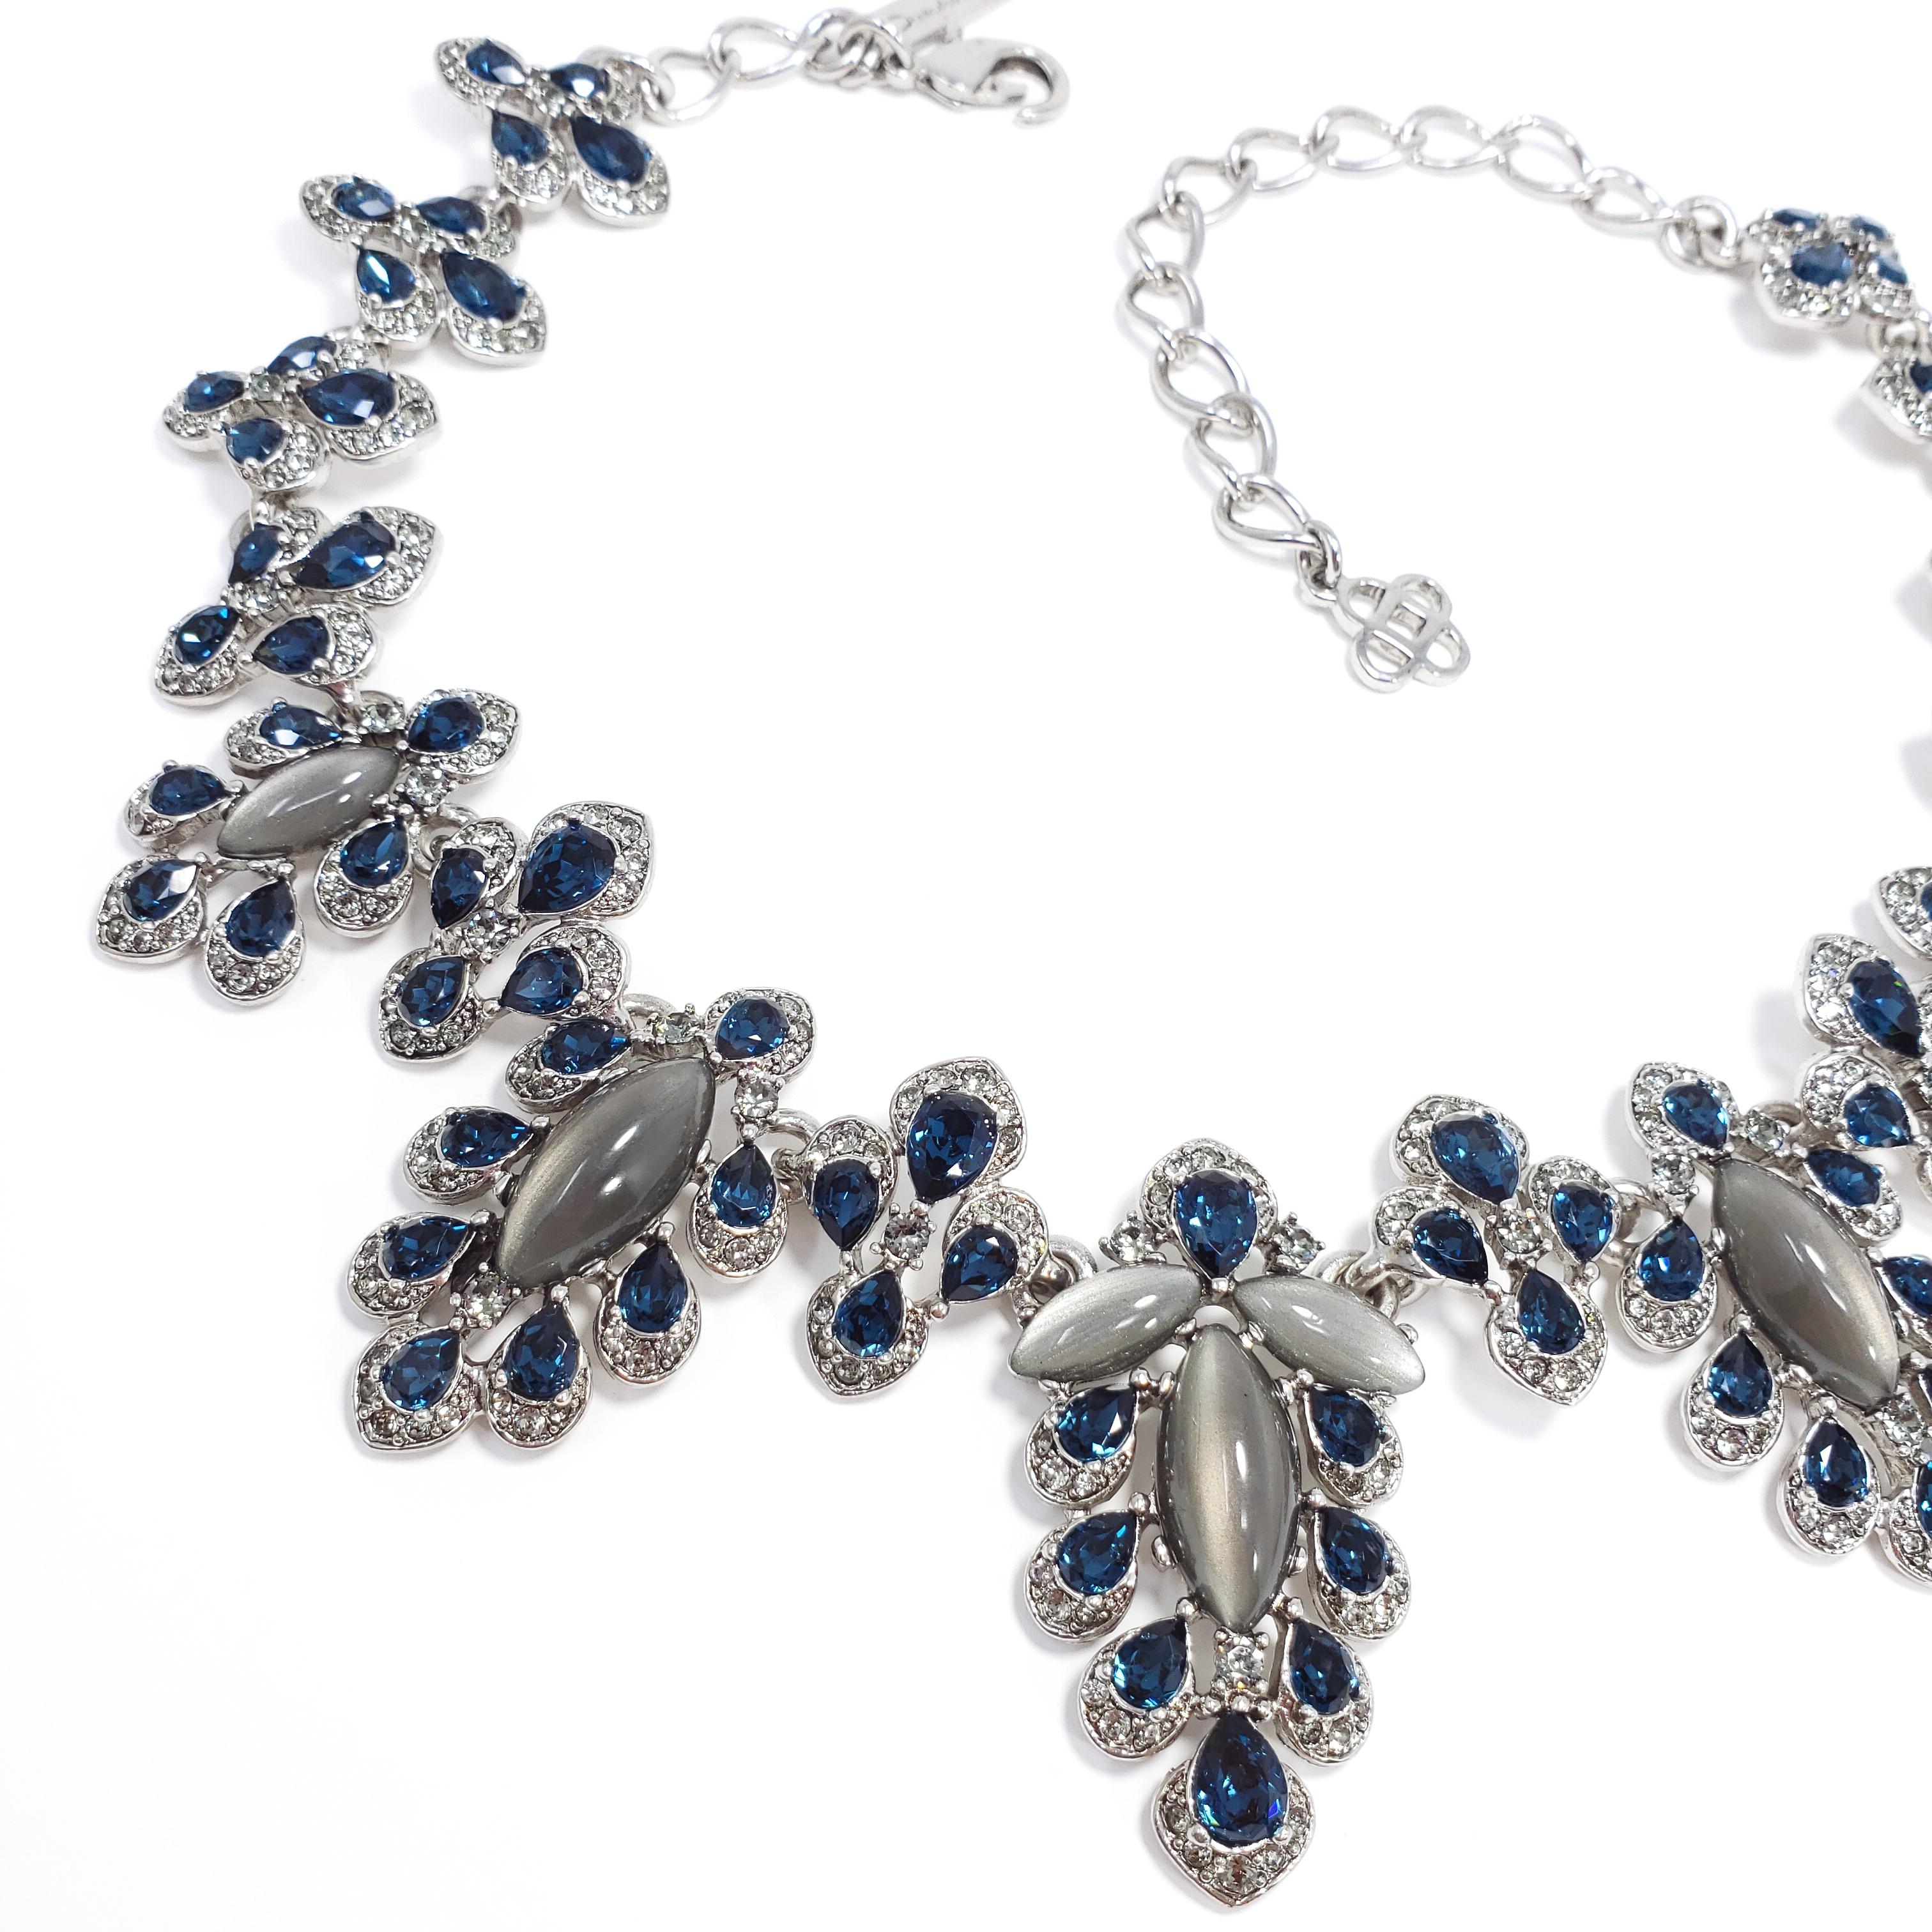 An Oscar de la Renta necklace from the parlor collection. Features links of parlor motifs, composed of dark blue and gray/clear crystals with centerpiece gray moonglow cabochons. Silvertone setting.

Length: 39.5 cm length + 9.5 cm extension